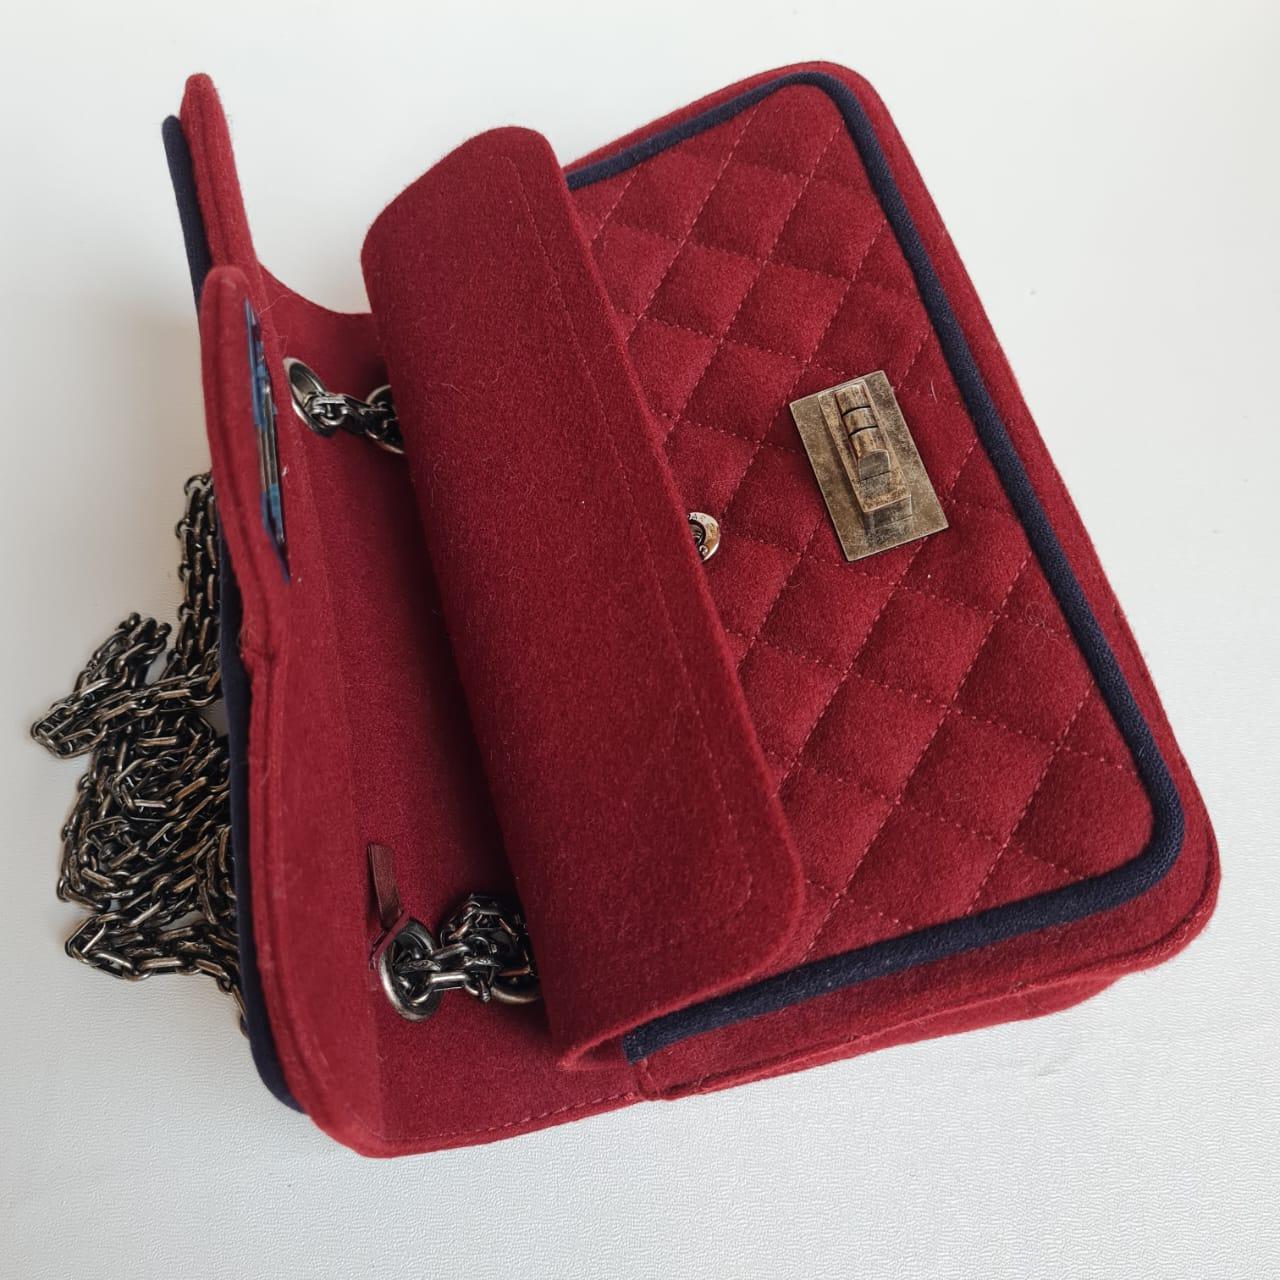 Chanel 2015 Red Edelweiss Reissue Wool Flap Bag In Good Condition For Sale In Jakarta, Daerah Khusus Ibukota Jakarta